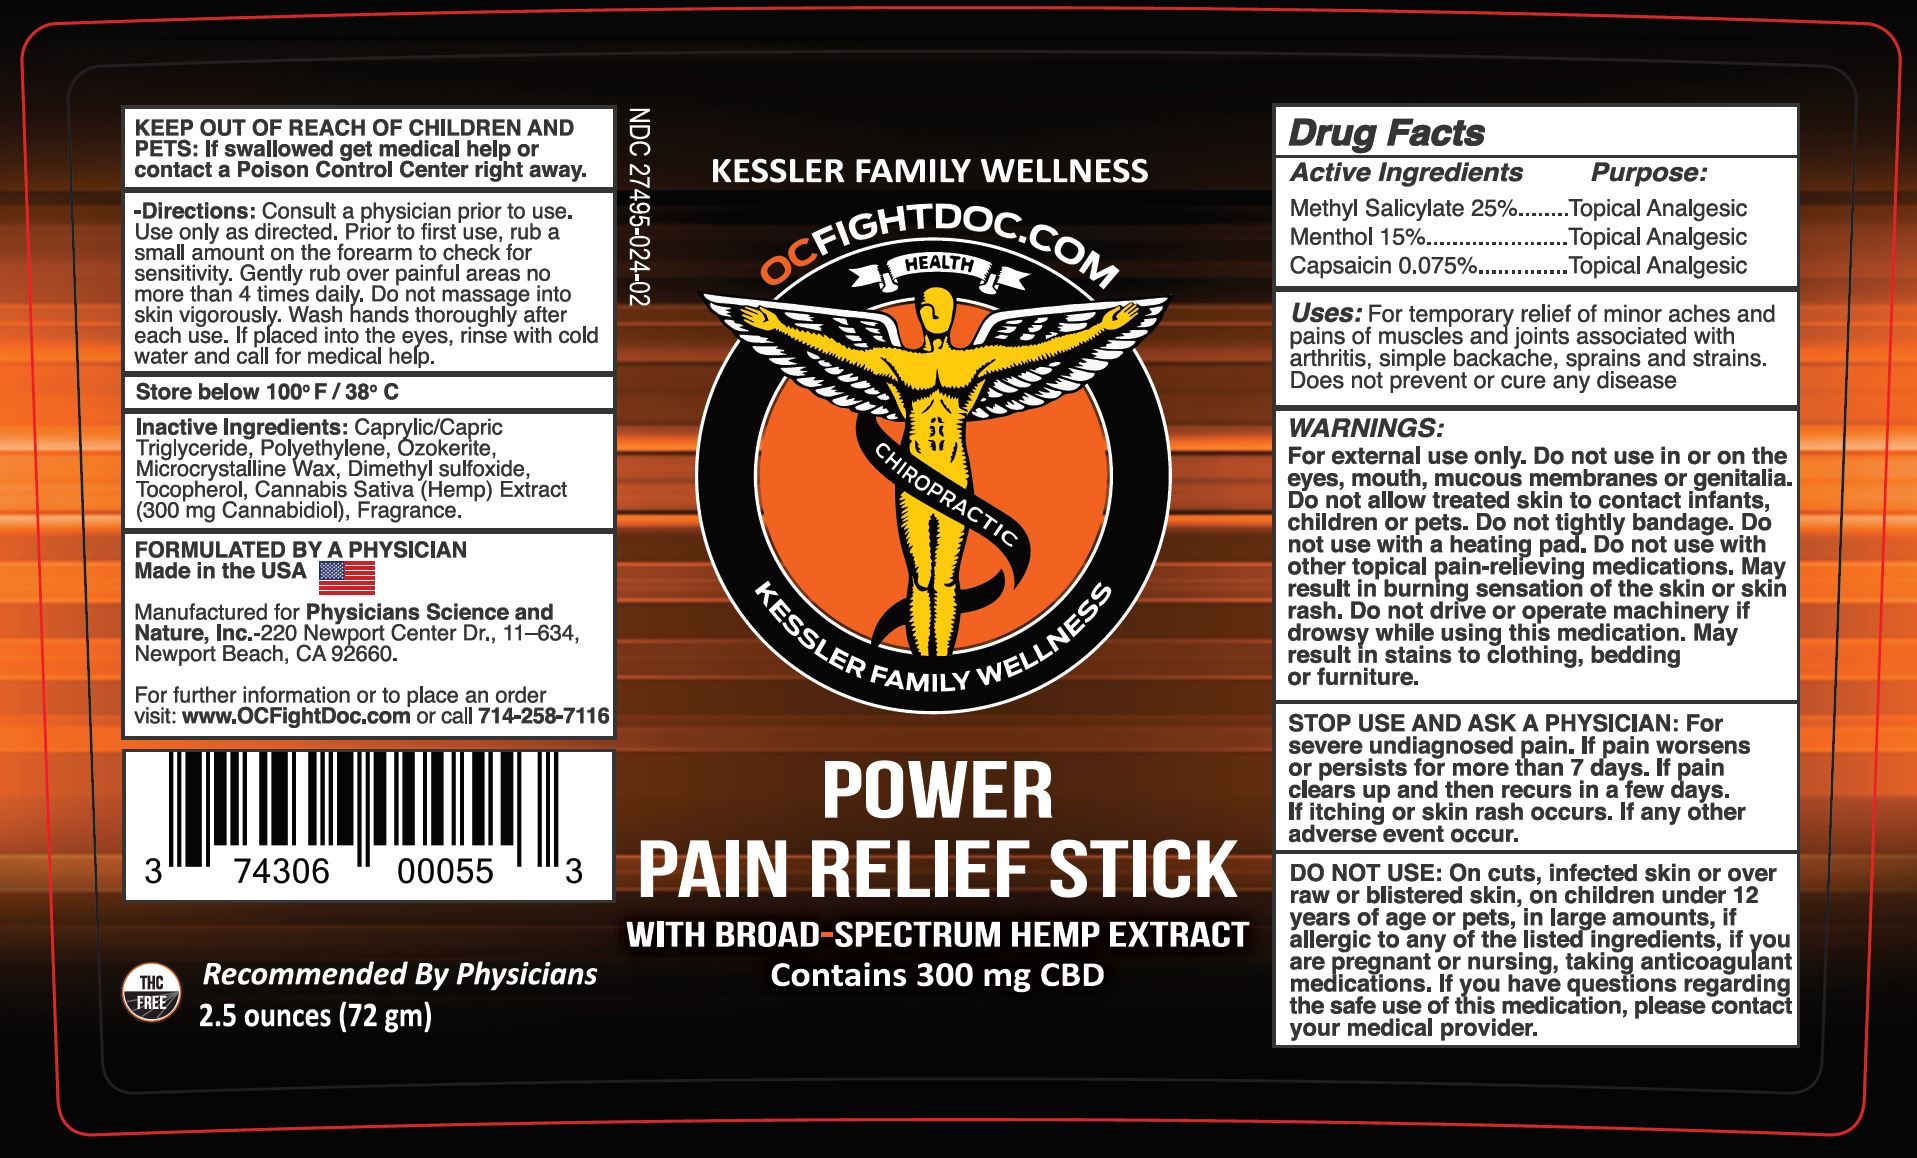 Power Pain Relief